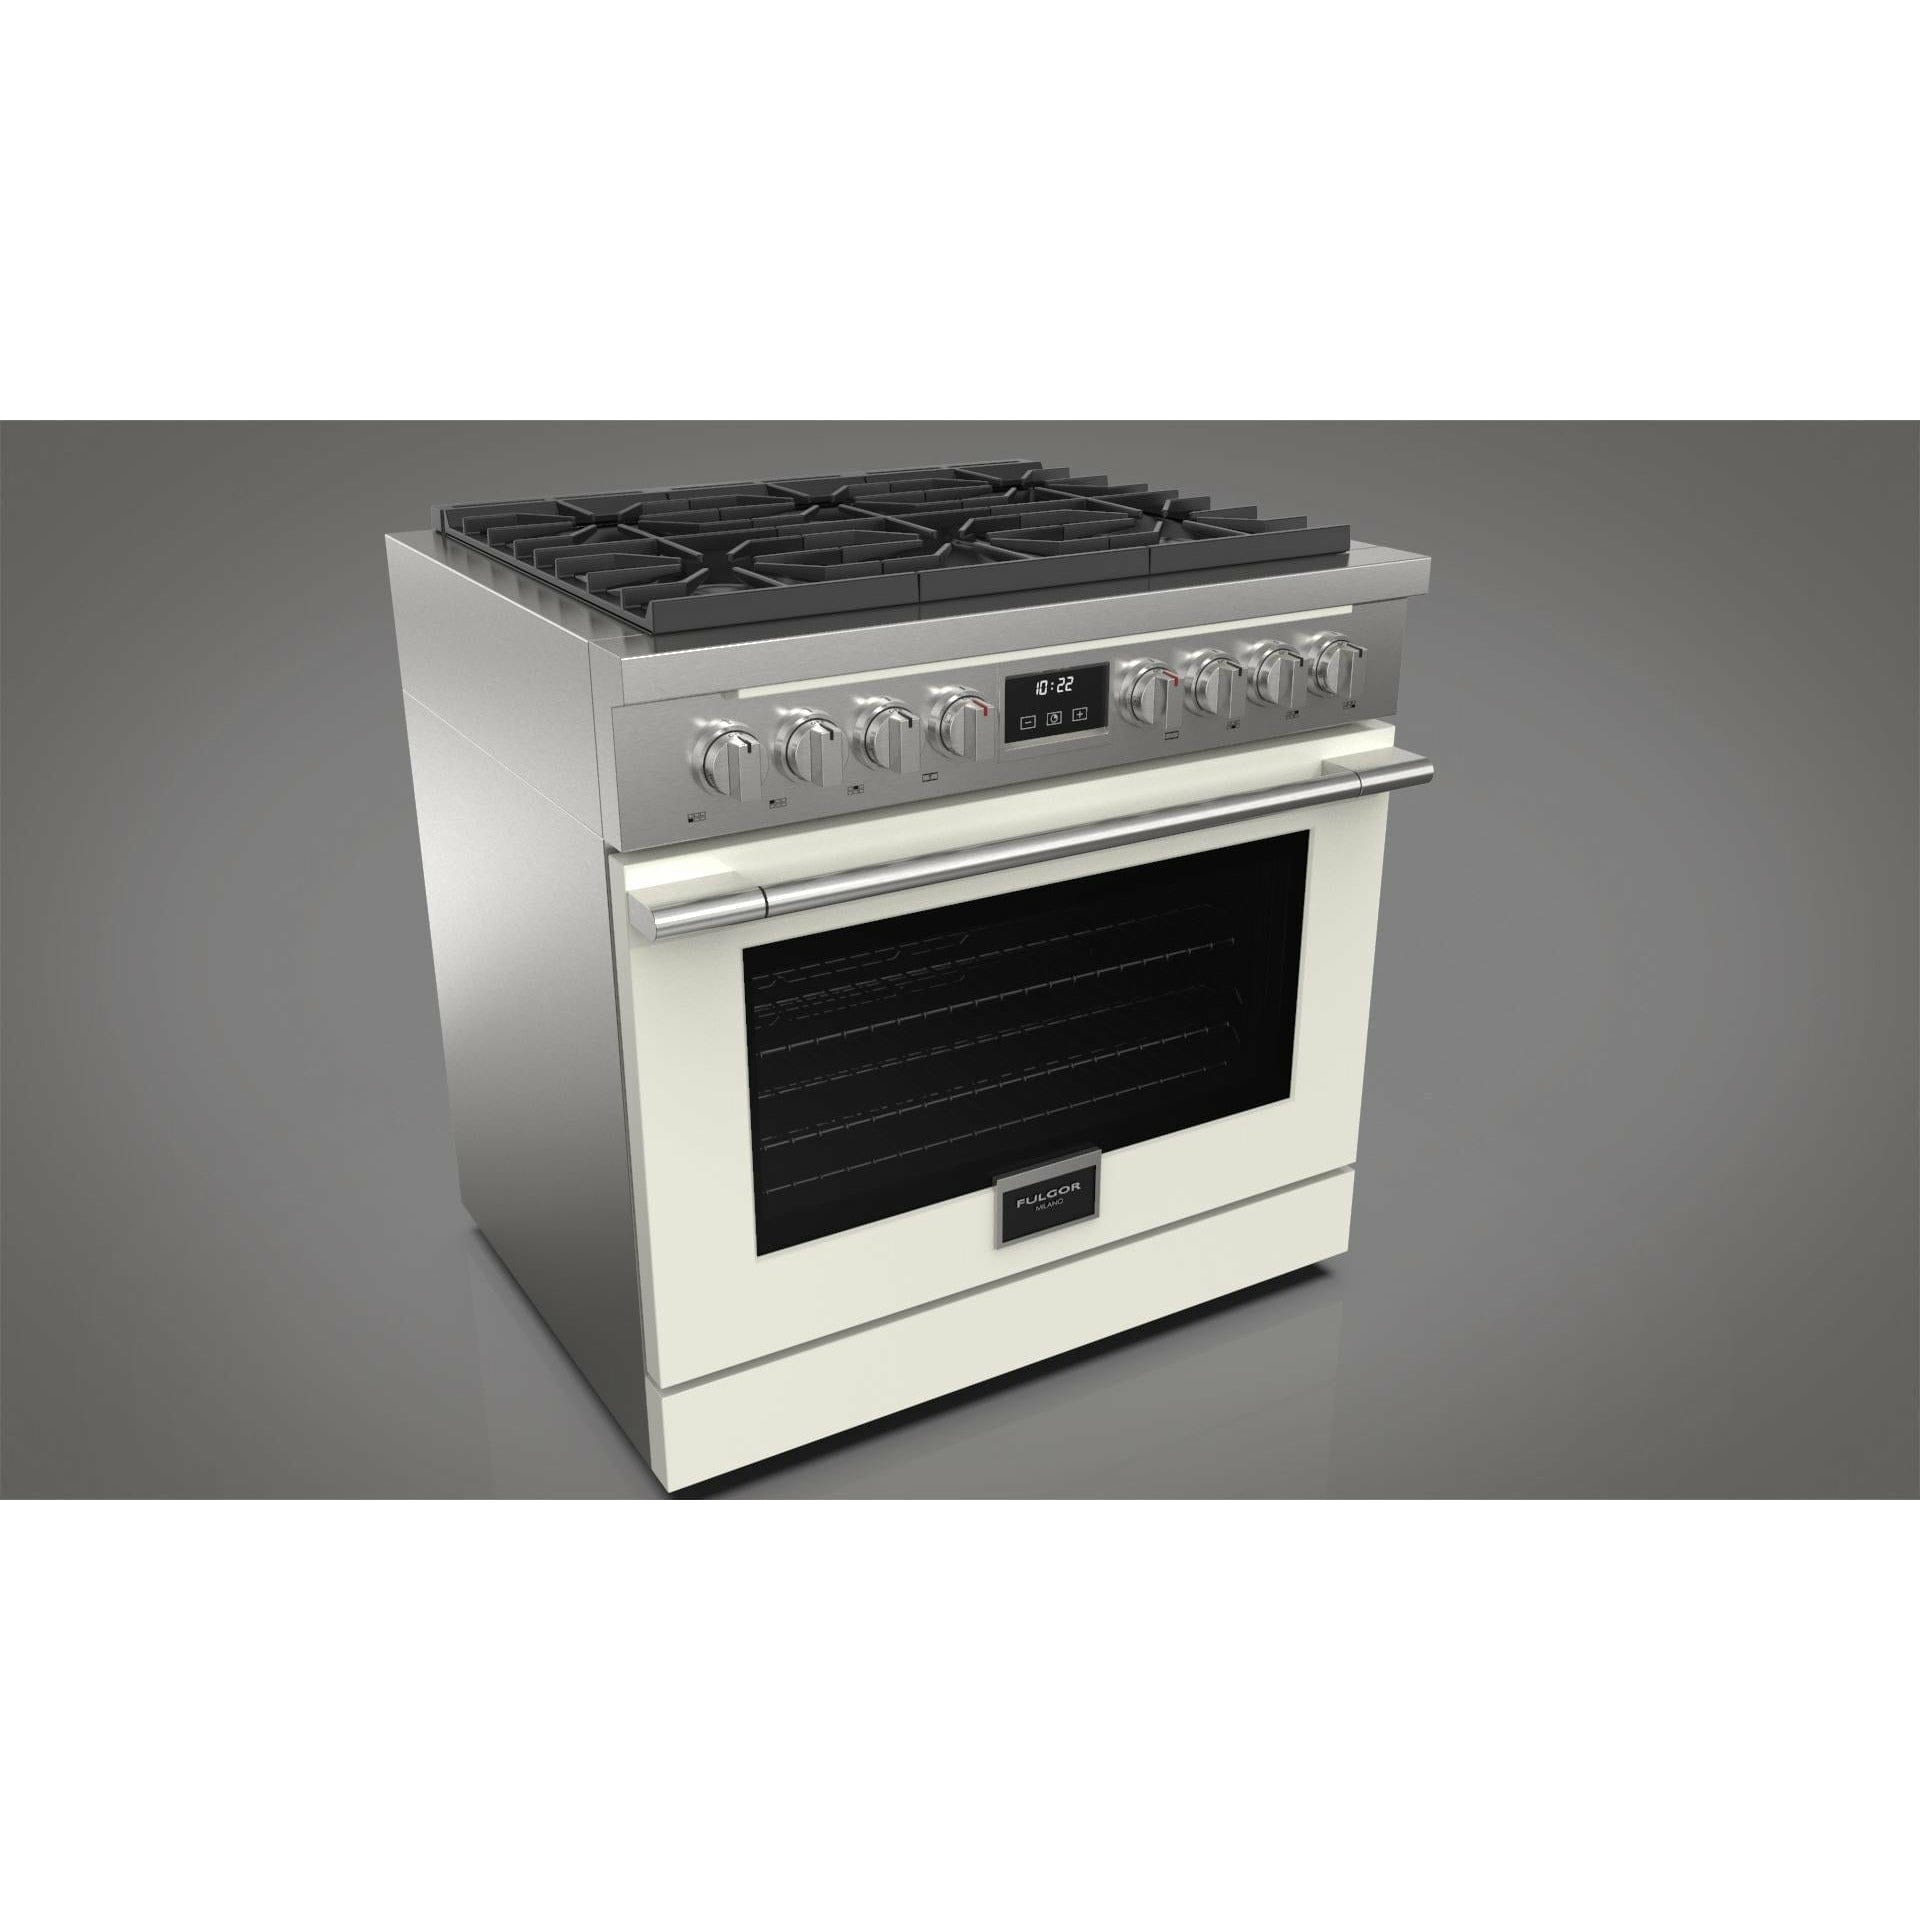 Fulgor Milano 36" Freestanding All Gas Range with 3 Duel Flame Burners, Stainless Steel - F4PGR366S2 Ranges Luxury Appliances Direct